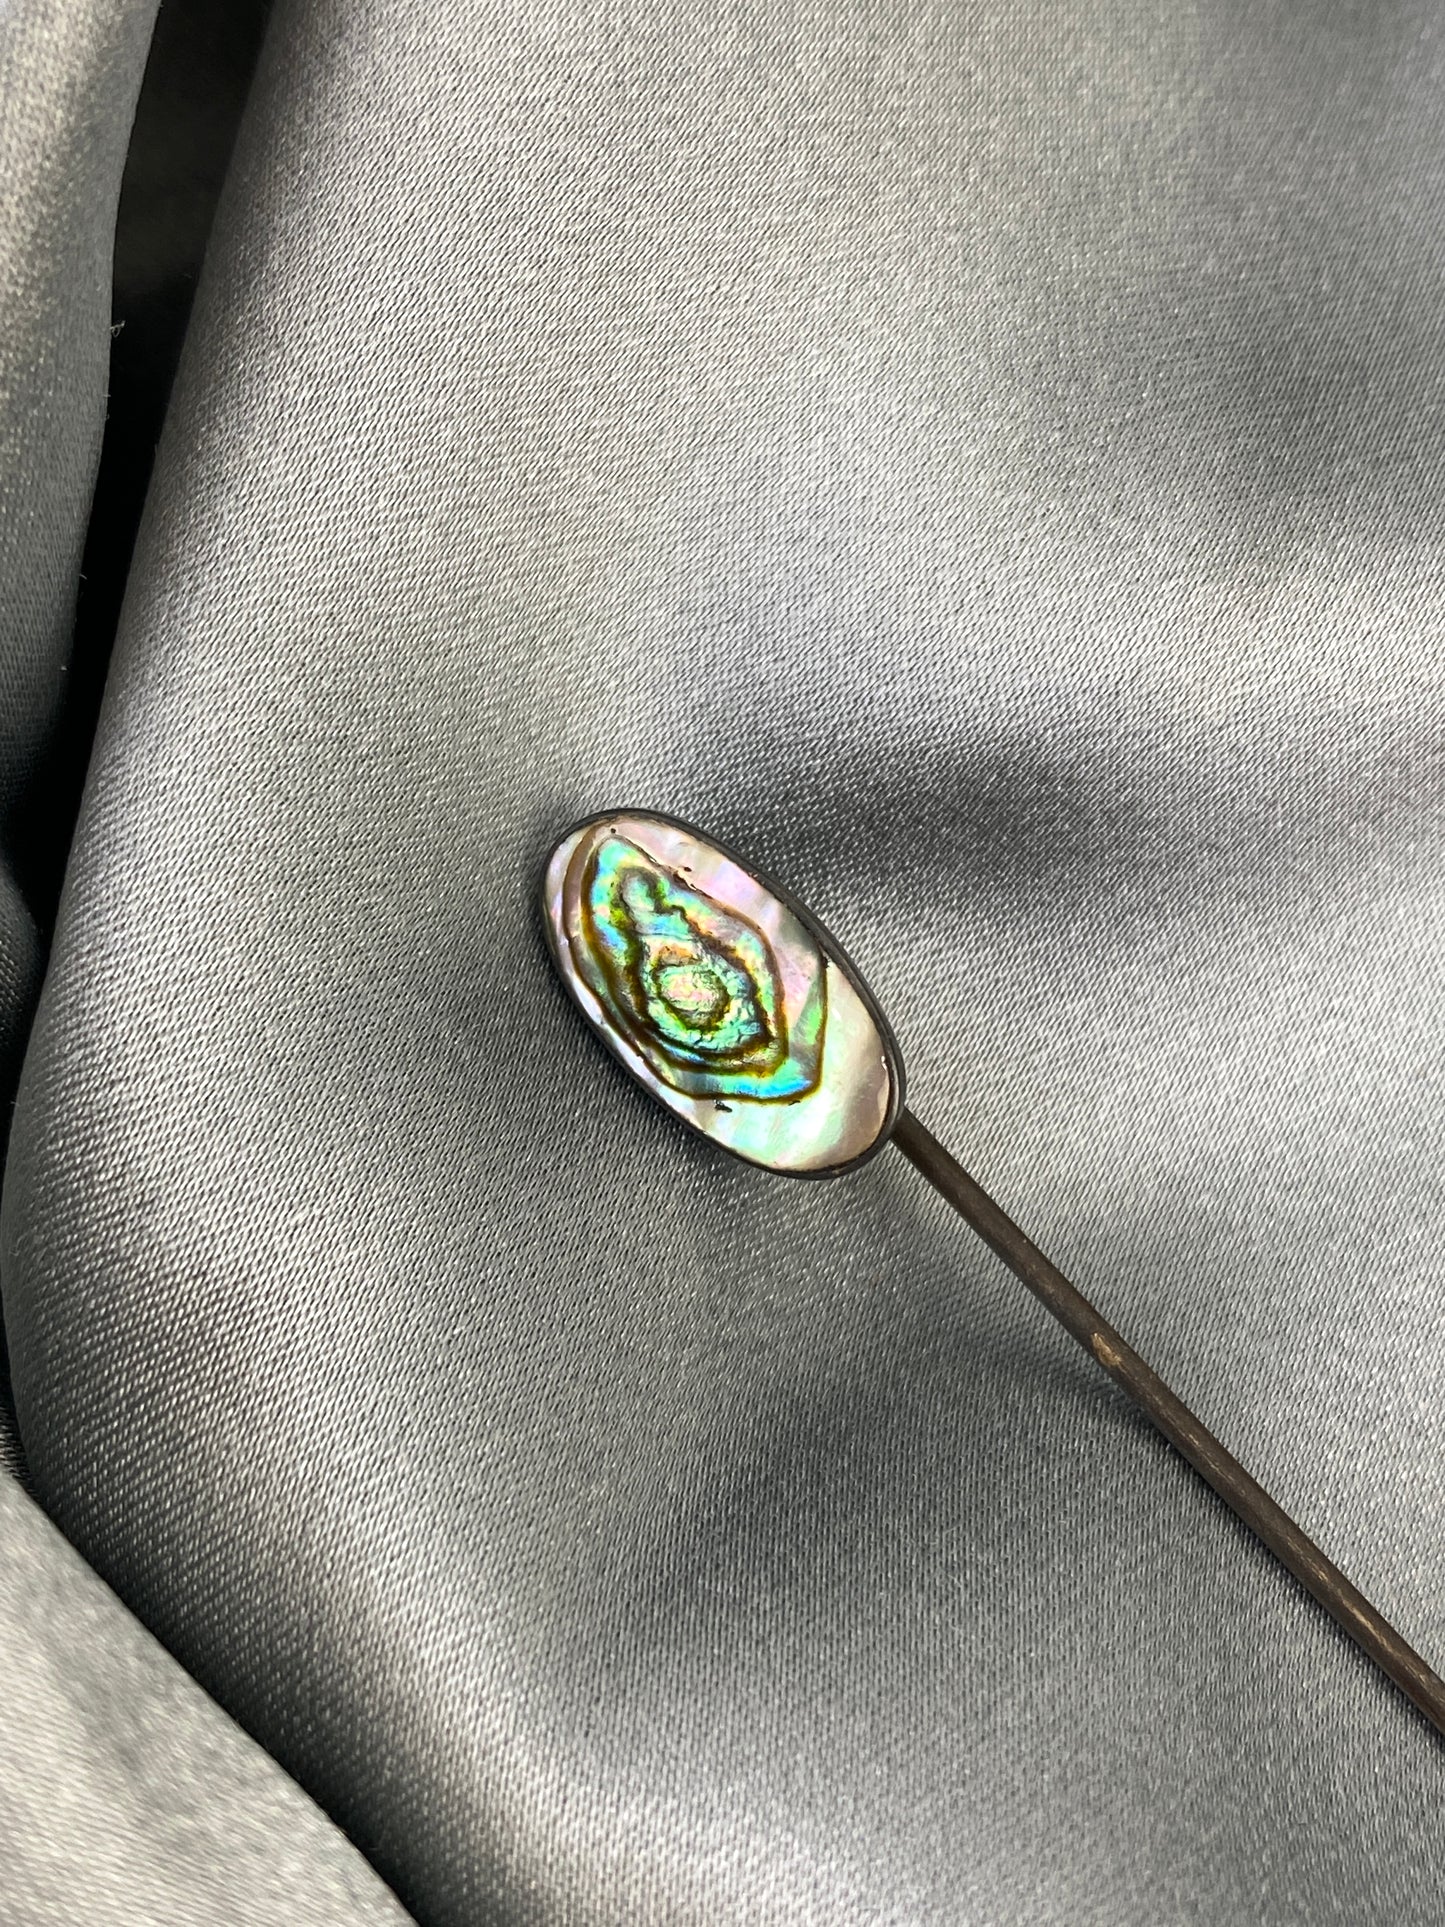 Antique 1910s Oval Shape Abalone Shell Silver Hat Pin